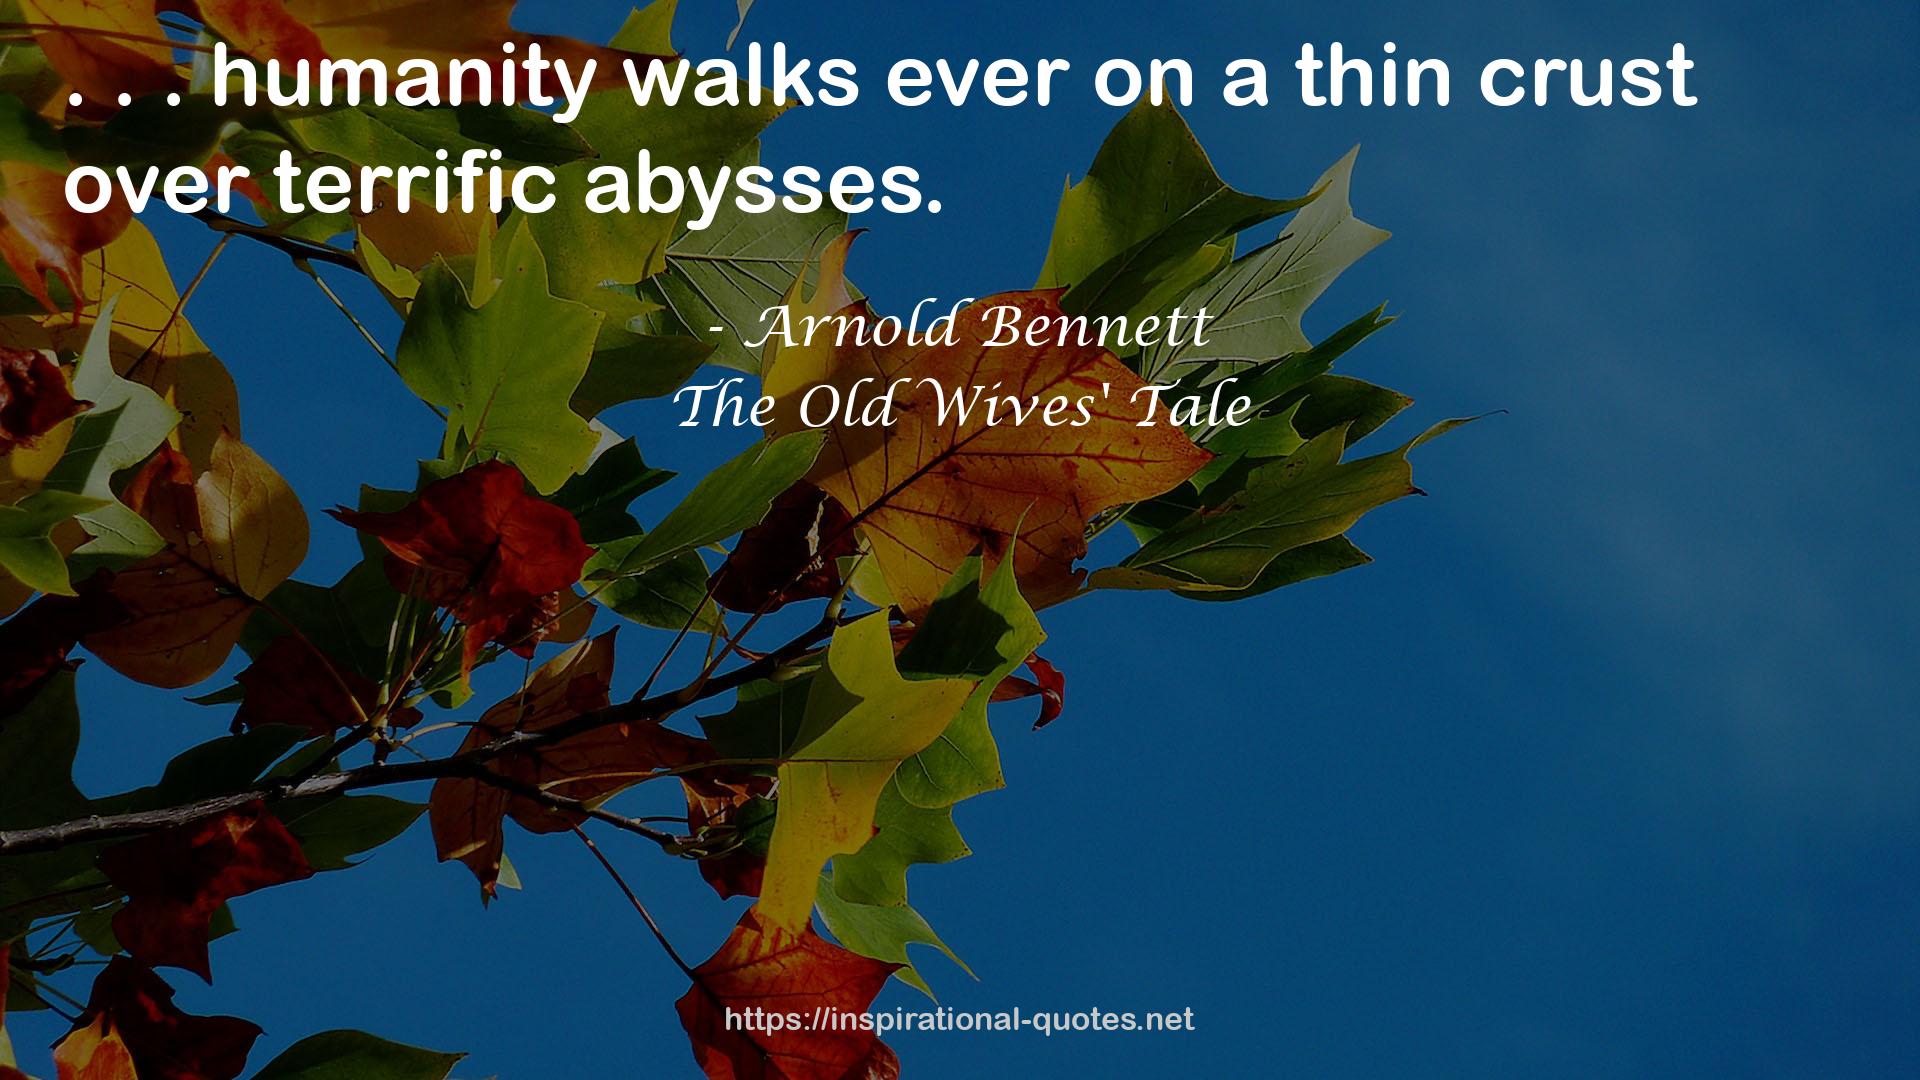 The Old Wives' Tale QUOTES